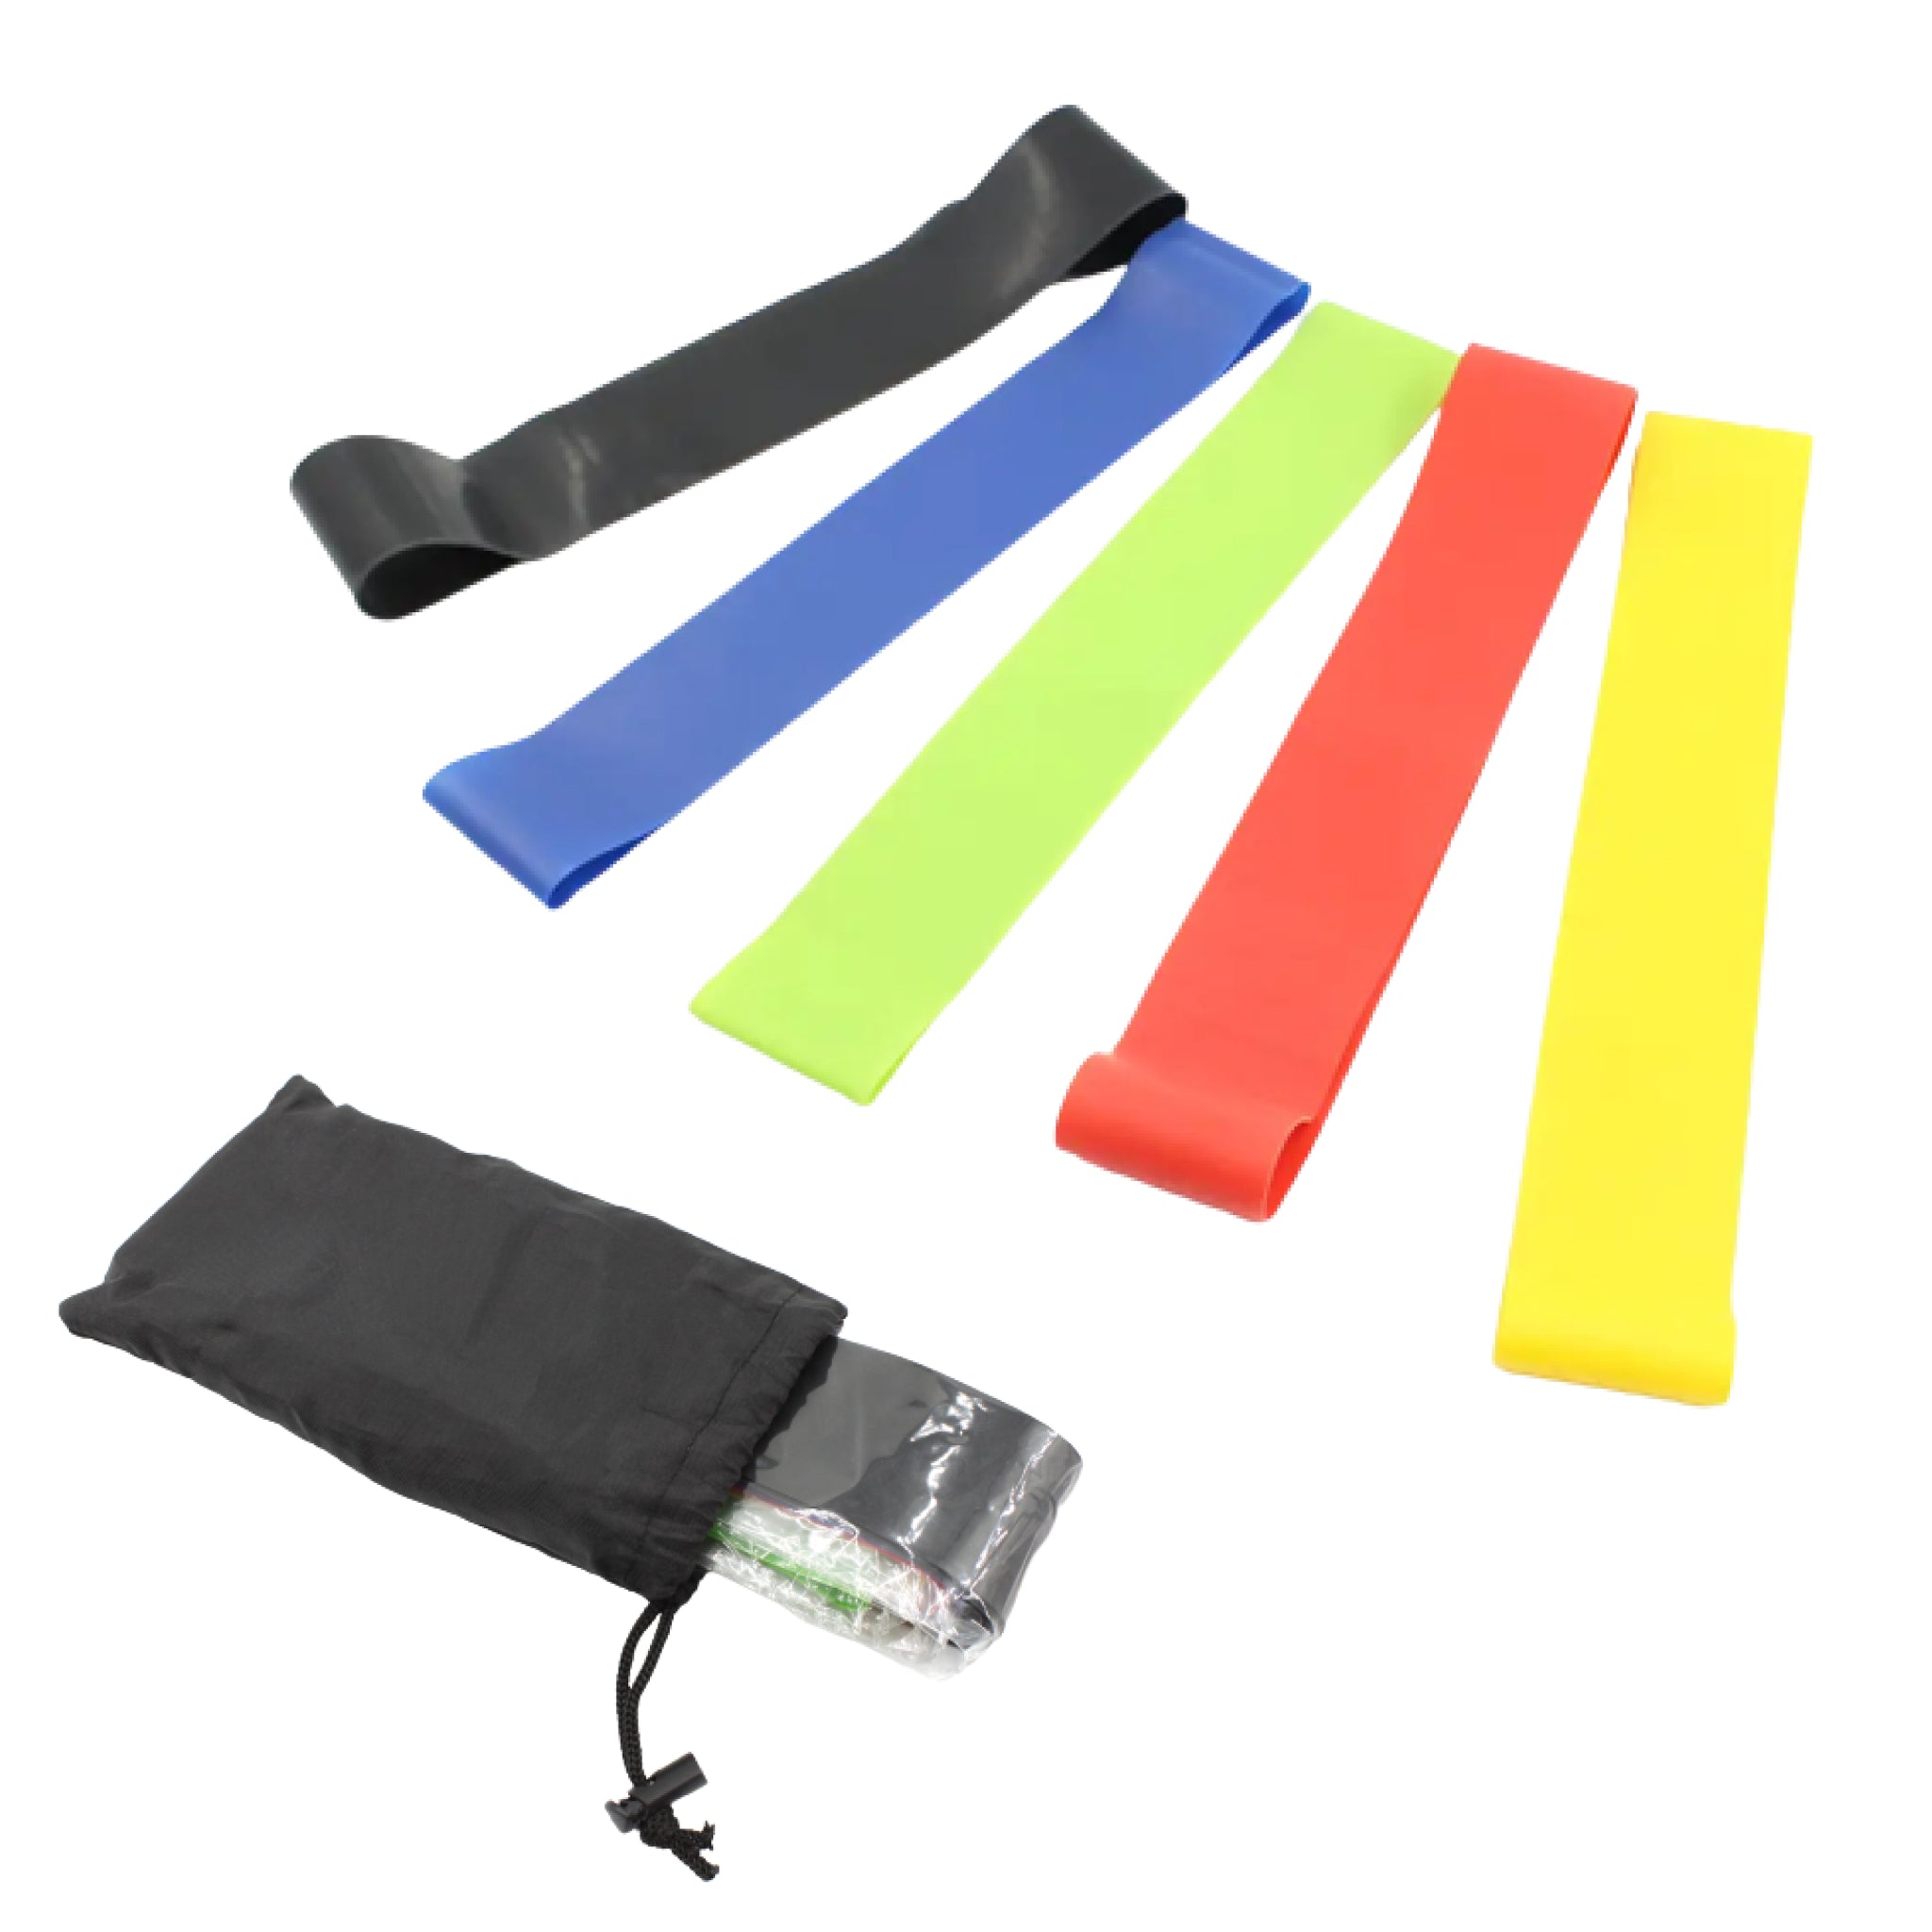 Multi-Colored Resistance Bands Set with Carrying Bag at Express Gym Supply